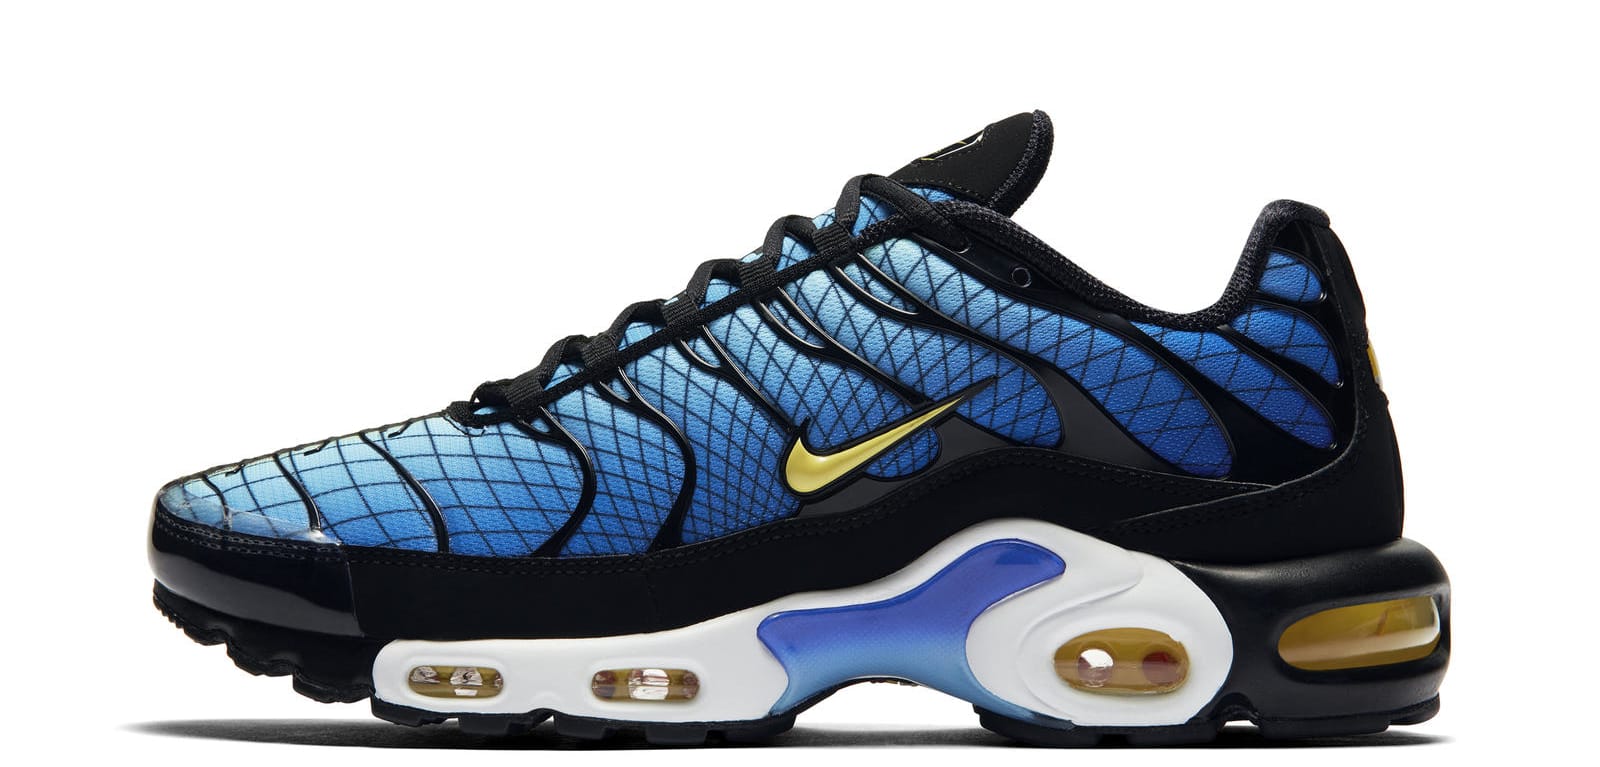 Mule upright goodbye Nike Air Max Plus 'Greedy' Release Date | Sole Collector